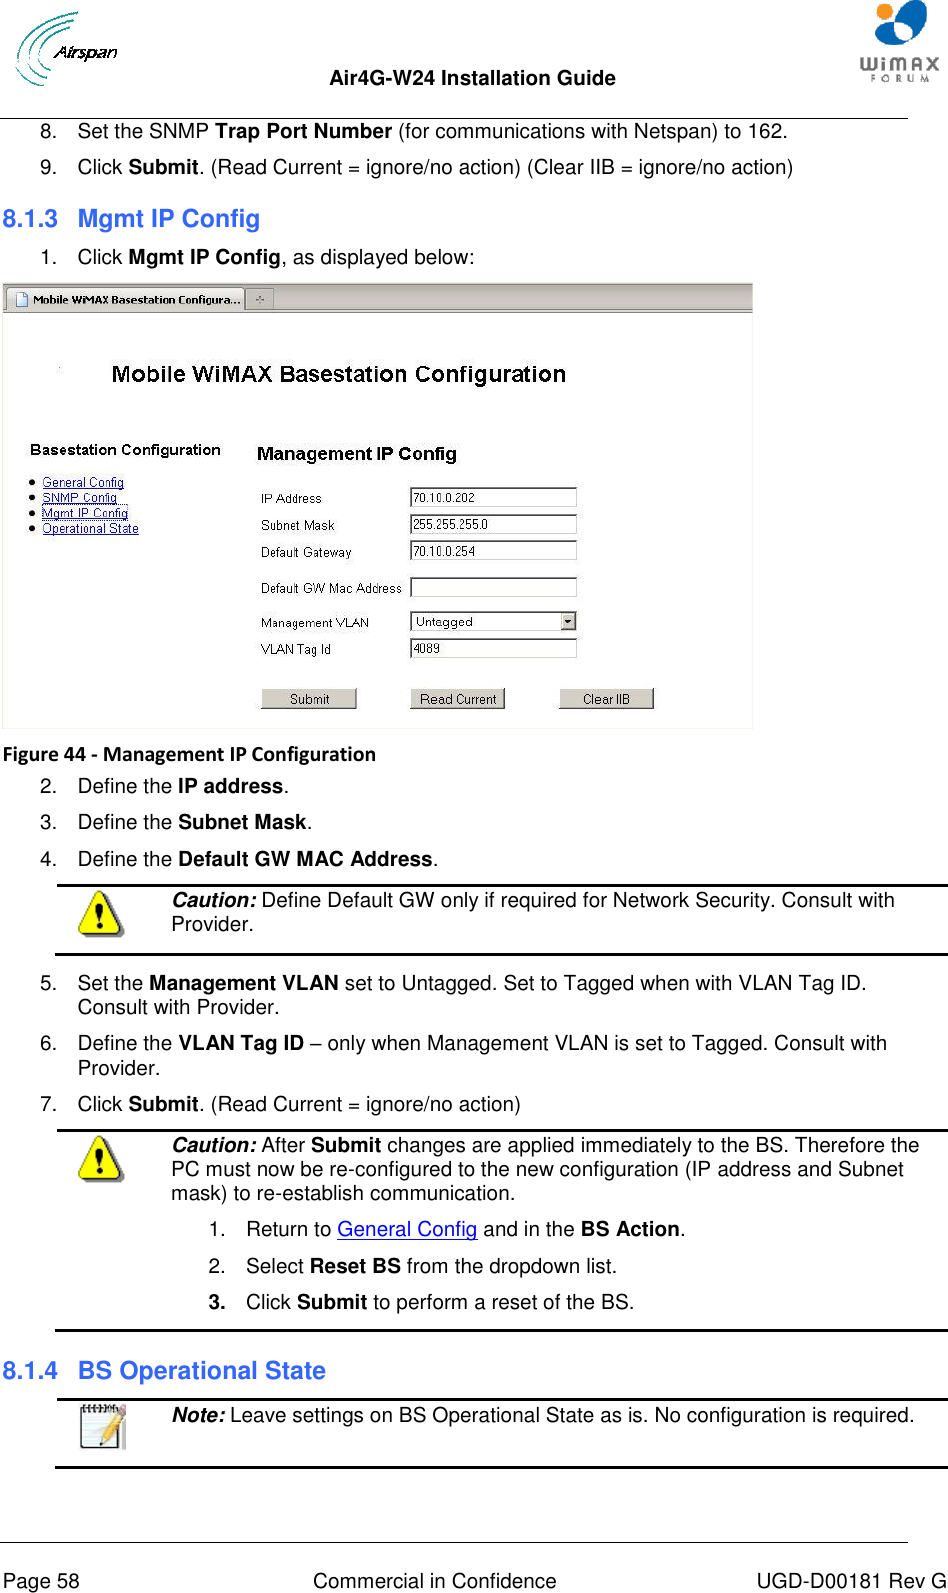  Air4G-W24 Installation Guide       Page 58  Commercial in Confidence  UGD-D00181 Rev G 8.  Set the SNMP Trap Port Number (for communications with Netspan) to 162. 9.  Click Submit. (Read Current = ignore/no action) (Clear IIB = ignore/no action) 8.1.3  Mgmt IP Config 1.  Click Mgmt IP Config, as displayed below:  Figure 44 - Management IP Configuration 2.  Define the IP address. 3.  Define the Subnet Mask. 4.  Define the Default GW MAC Address.  Caution: Define Default GW only if required for Network Security. Consult with Provider.  5.  Set the Management VLAN set to Untagged. Set to Tagged when with VLAN Tag ID. Consult with Provider. 6.  Define the VLAN Tag ID – only when Management VLAN is set to Tagged. Consult with Provider. 7.  Click Submit. (Read Current = ignore/no action)  Caution: After Submit changes are applied immediately to the BS. Therefore the PC must now be re-configured to the new configuration (IP address and Subnet mask) to re-establish communication.  1.  Return to General Config and in the BS Action.  2.  Select Reset BS from the dropdown list.  3.  Click Submit to perform a reset of the BS. 8.1.4  BS Operational State   Note: Leave settings on BS Operational State as is. No configuration is required. 